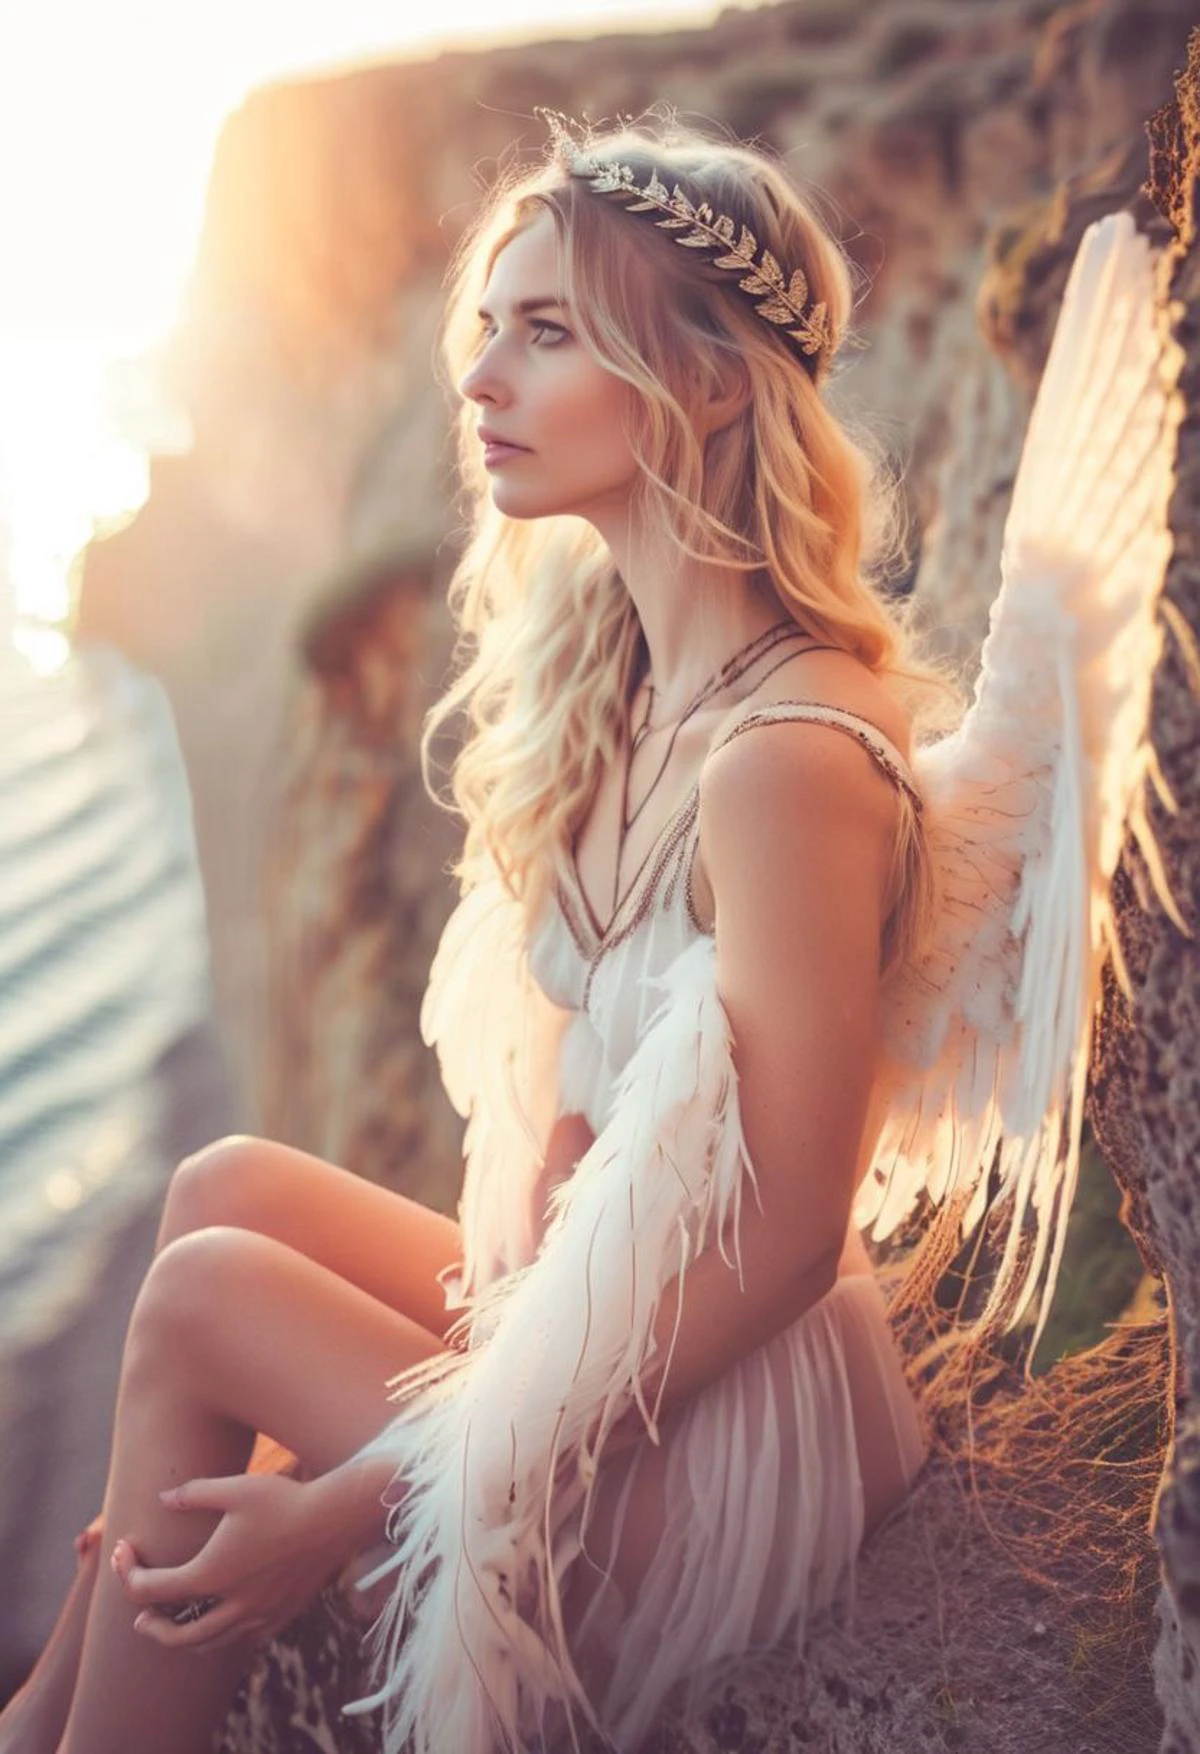 raw photo, portrait, angel girl, Elsa,, blonde, 25yo, thoughtful, sunset lights, sitting on the edge of a cliff, breathtaking raw photo shot, angelcore, realistic photo grain, portrait, feathered detailed wings